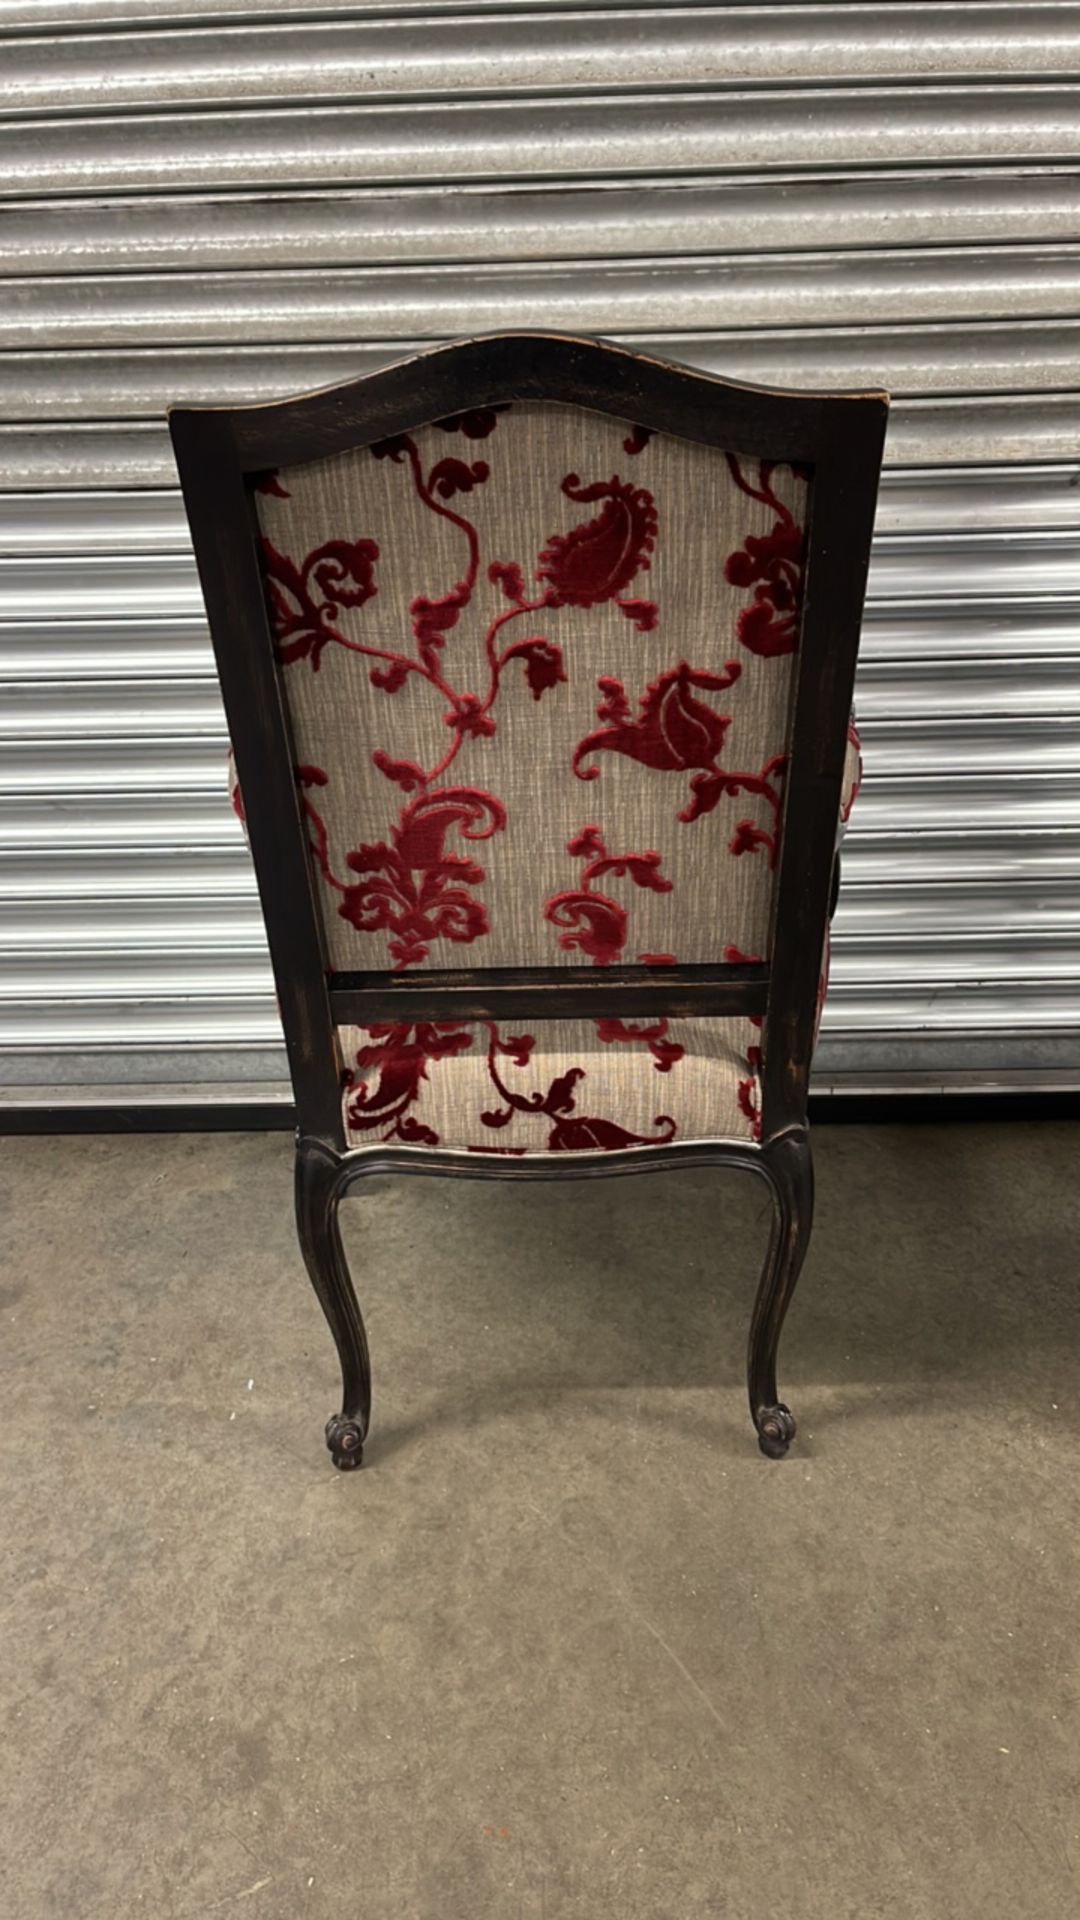 Pair of Roche Bobois Floral Dining Chairs with Arms - Image 6 of 7